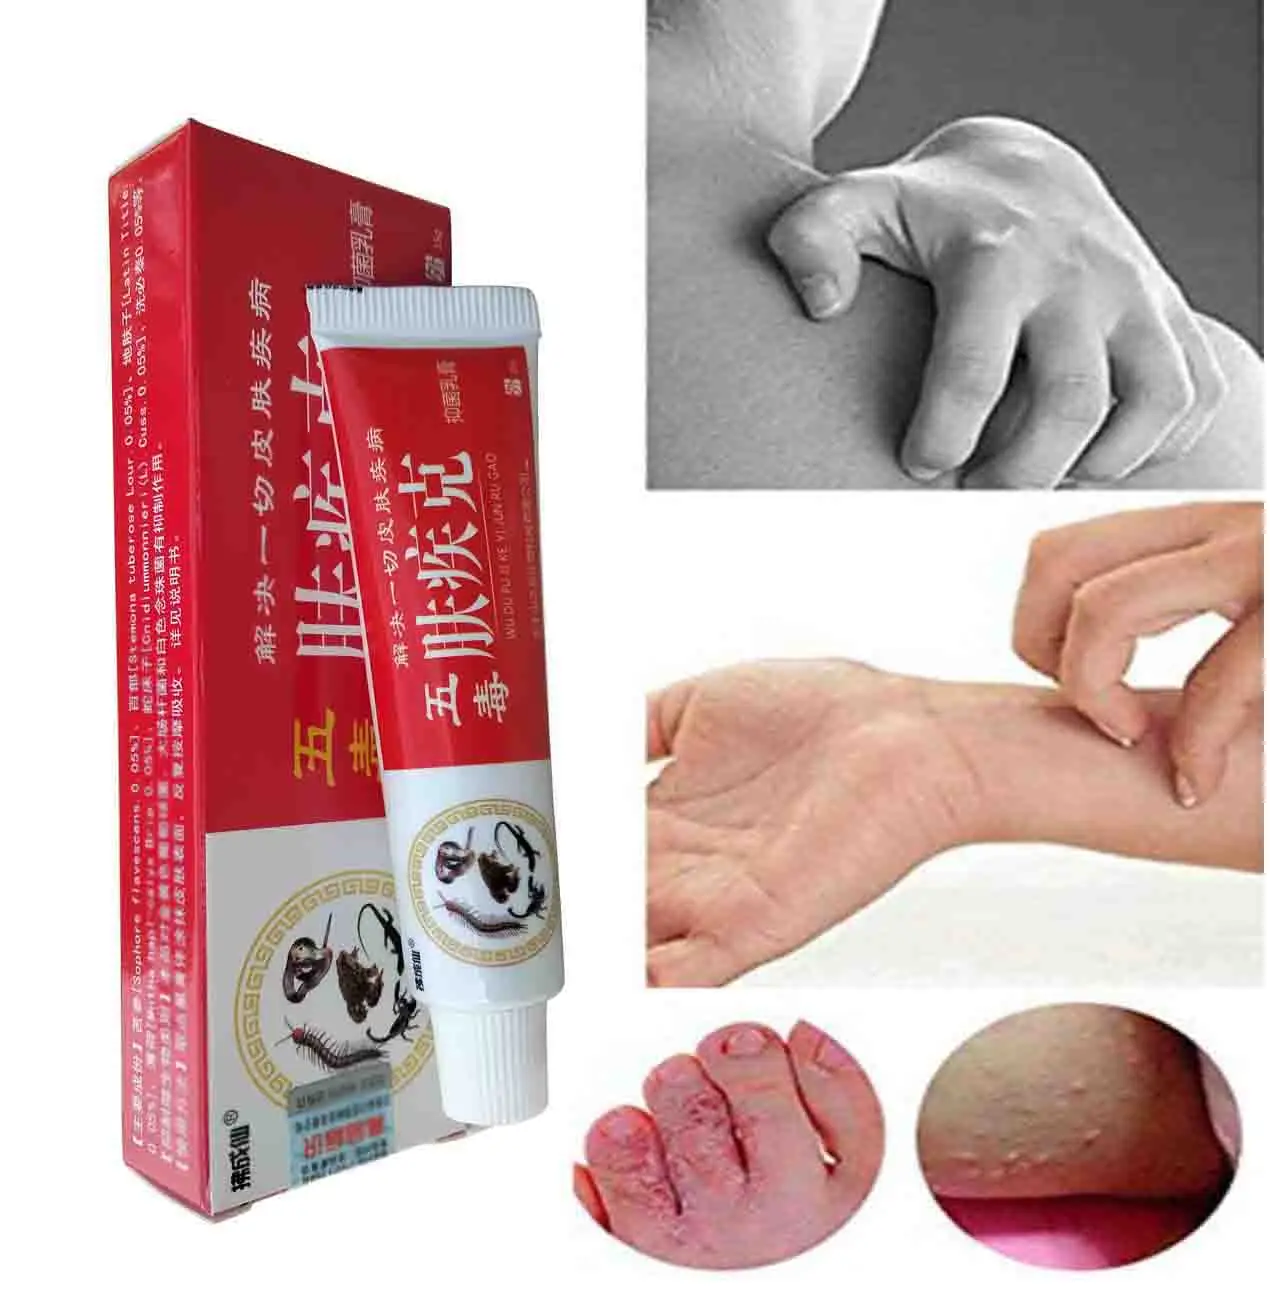 

Rash Treatment Psoriasis Ointment Natural Chinese Herbal Eczema, Creams Dermatitis Pruritus Anti-Itch External Use Only FJK